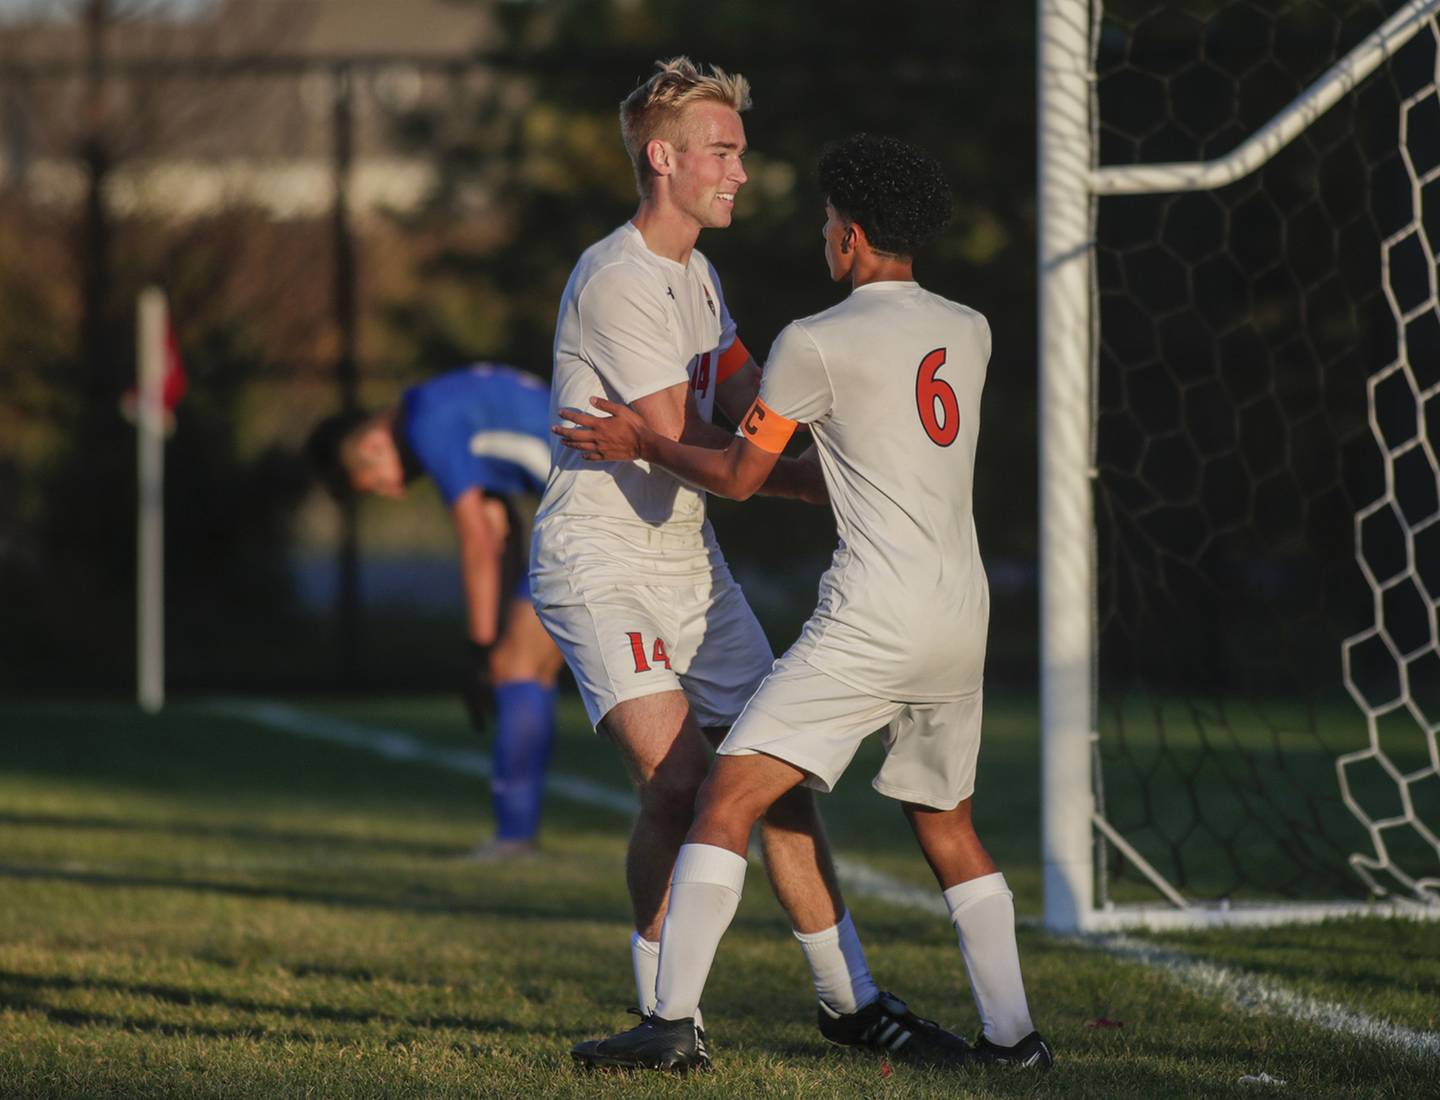 Oswego’s Salvador Martinez (6) celebrates with William Kalsto (14) celebrate after scoring a goal against Marmion during a nonconference game in Aurora on Wednesday, Oct. 12, 2022.